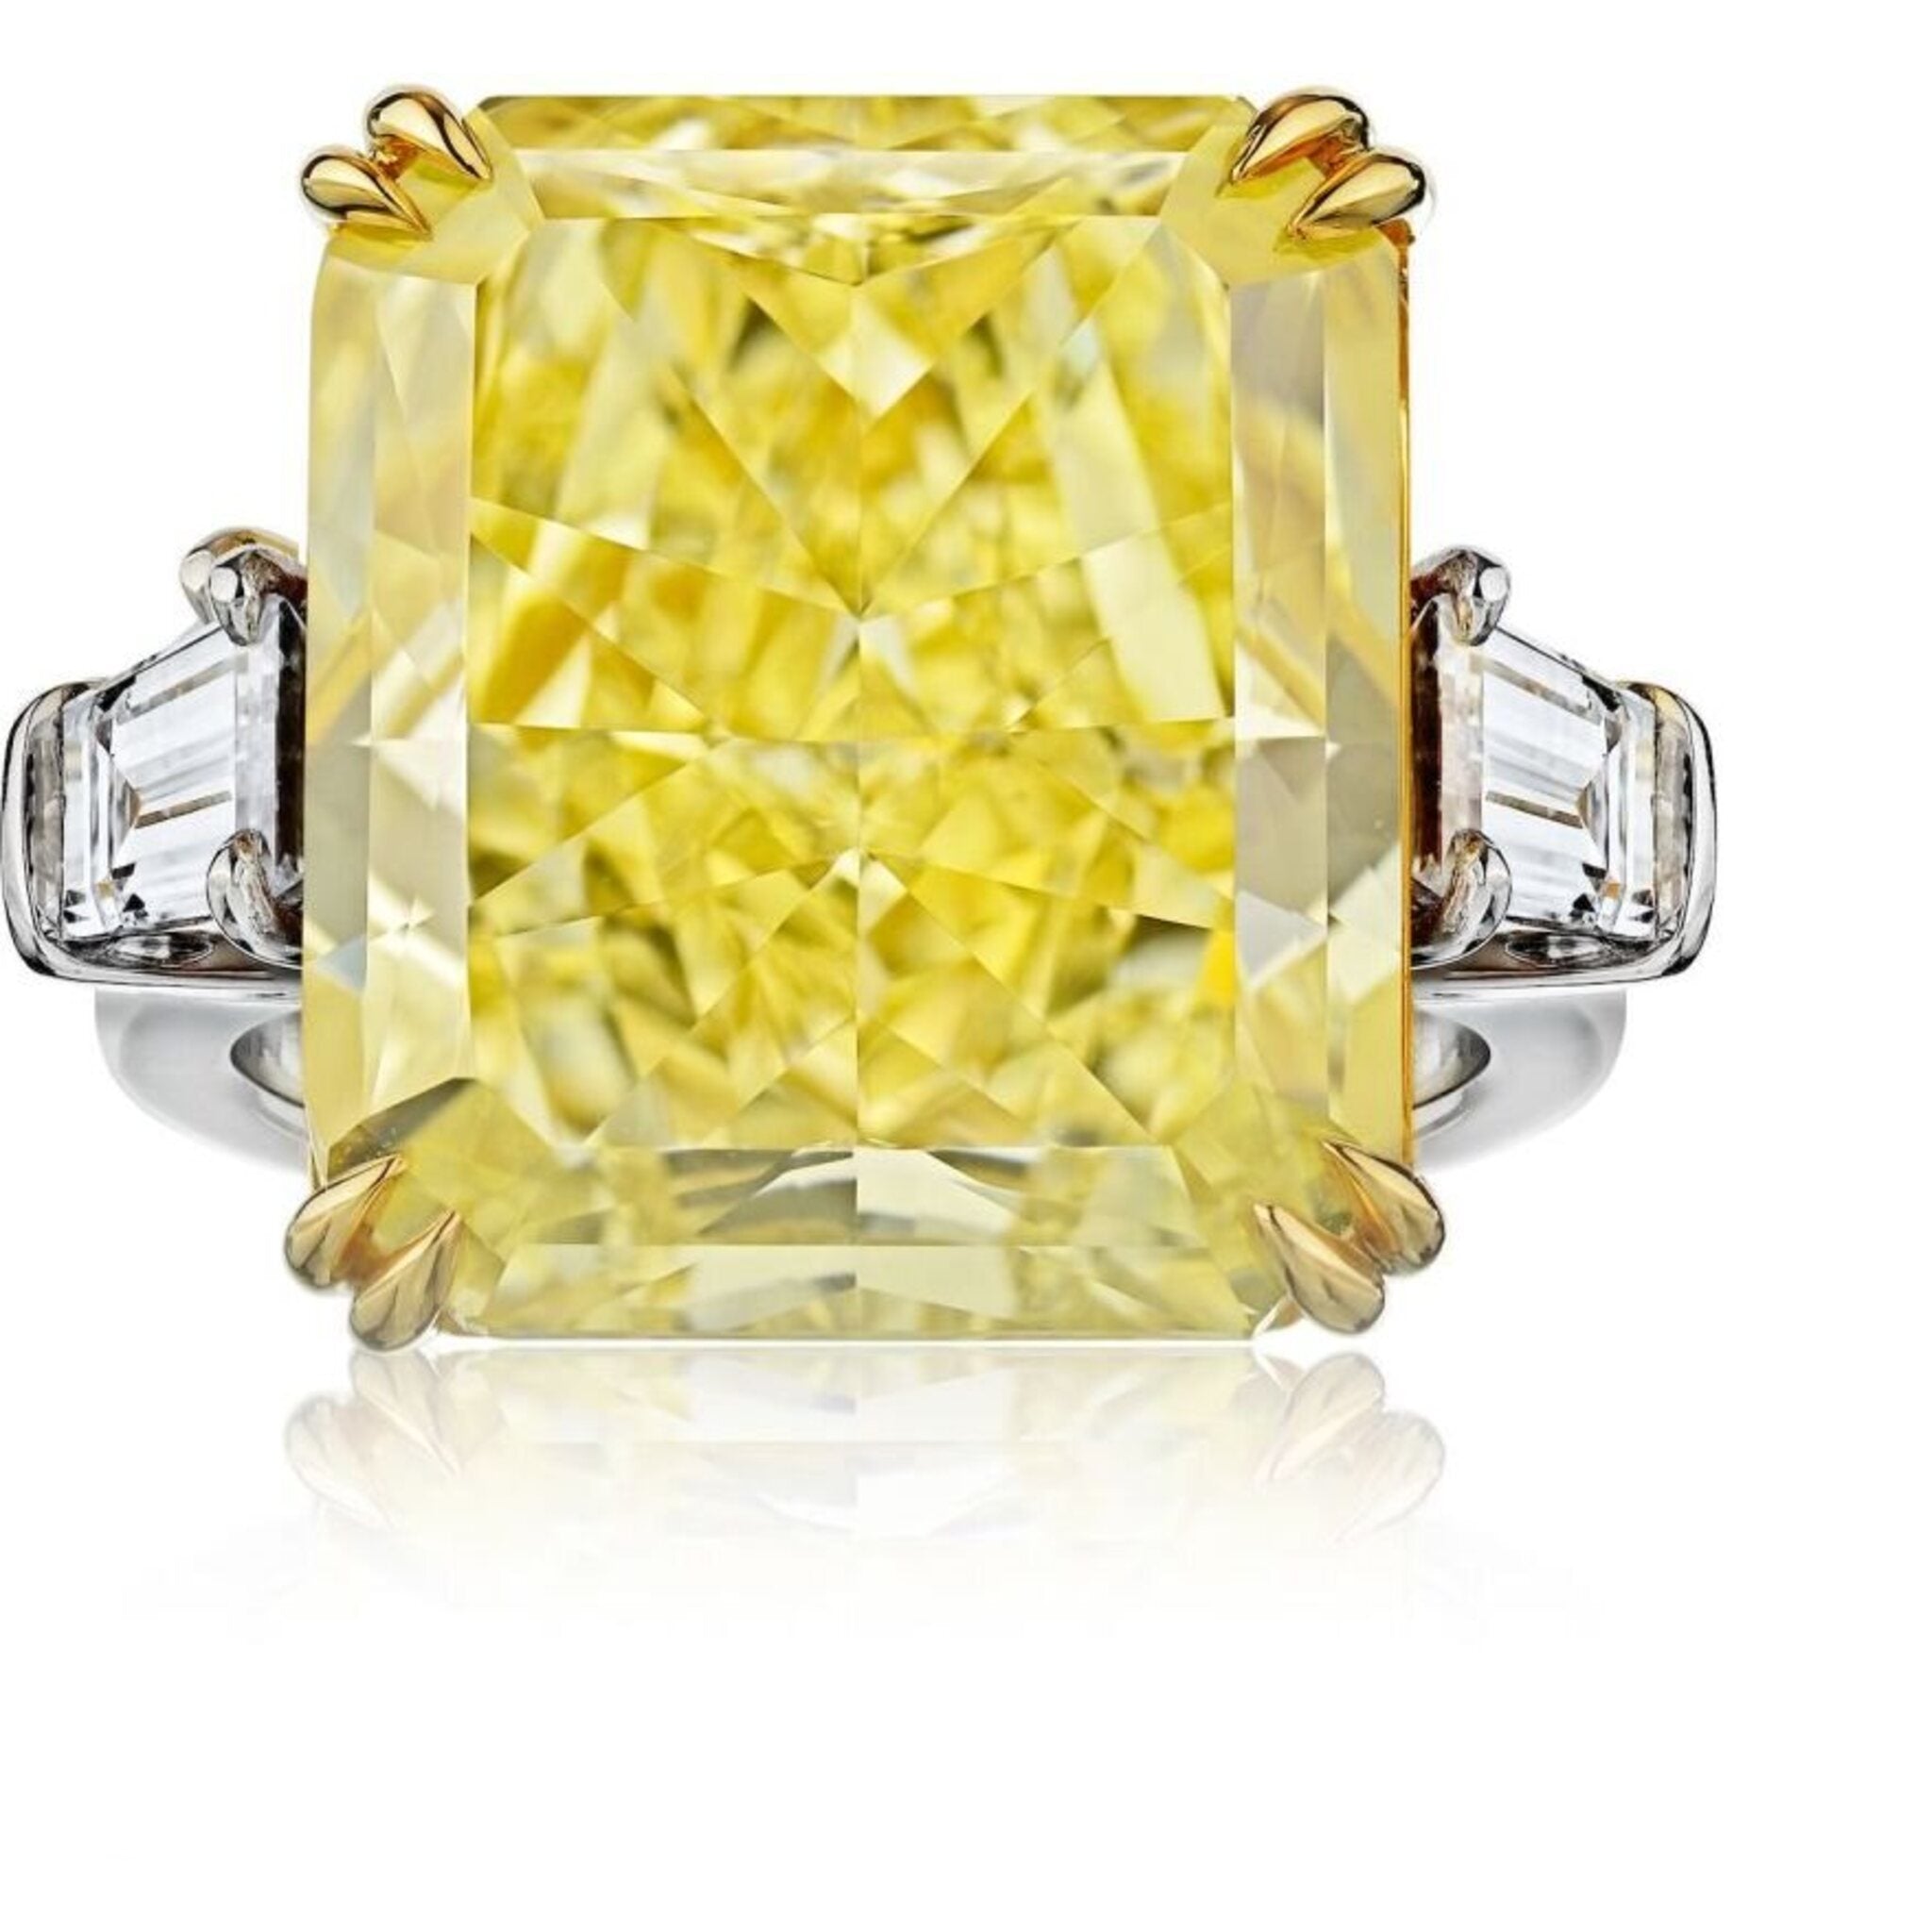 20 Carat Radiant Cut Diamond Fancy Intense Yellow GIA Bullets on the side  Ring